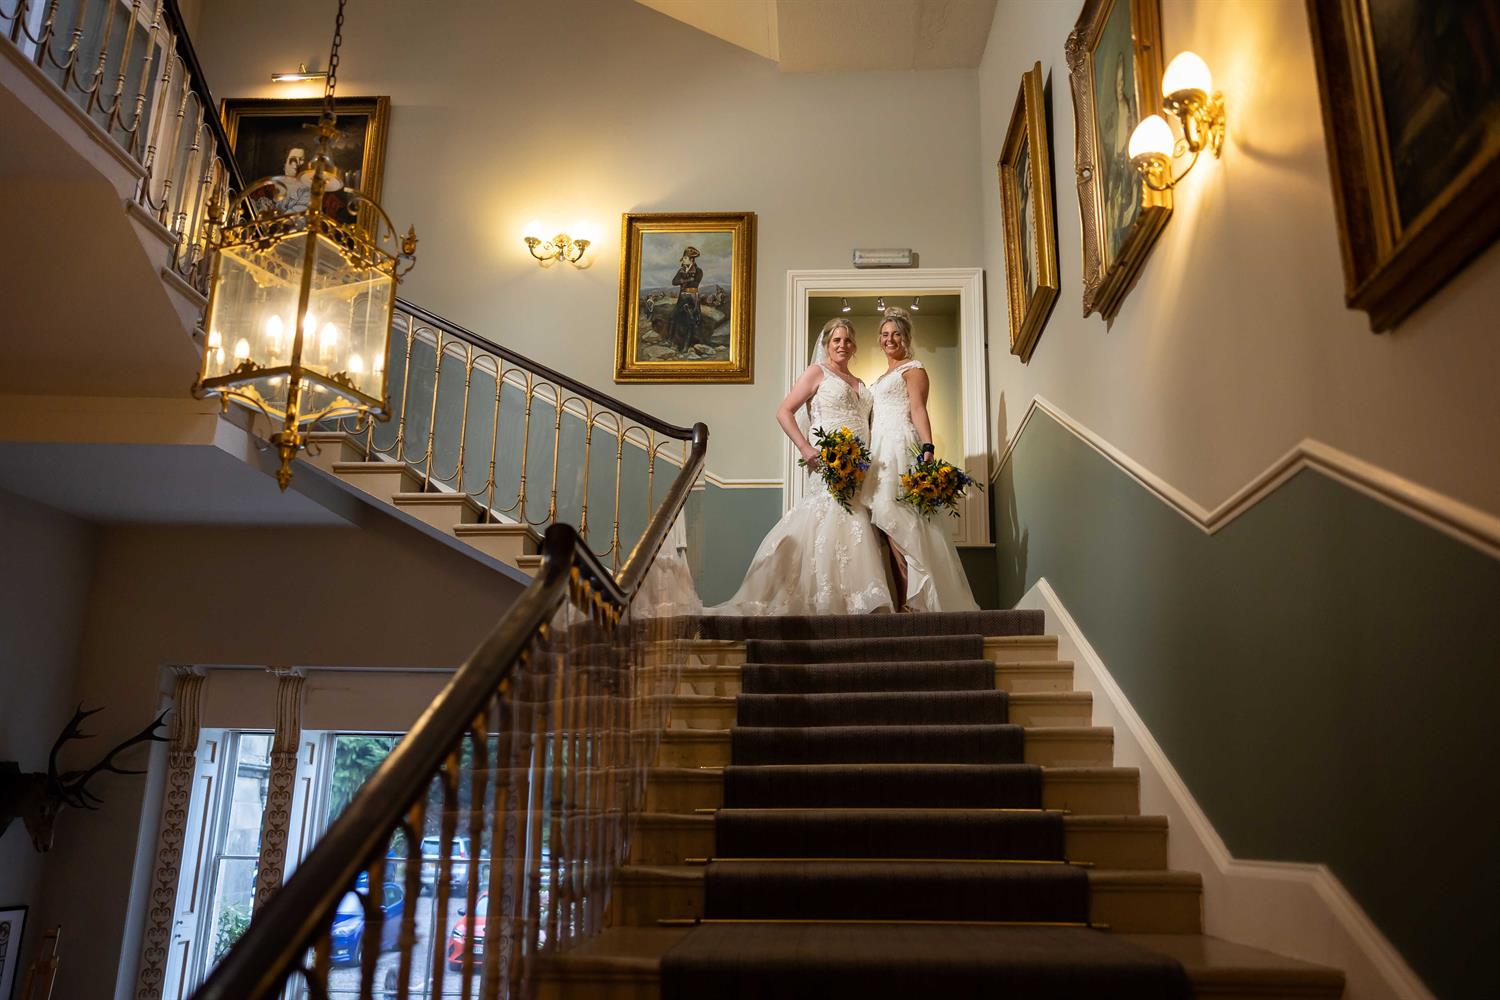 Two brides along the stairs